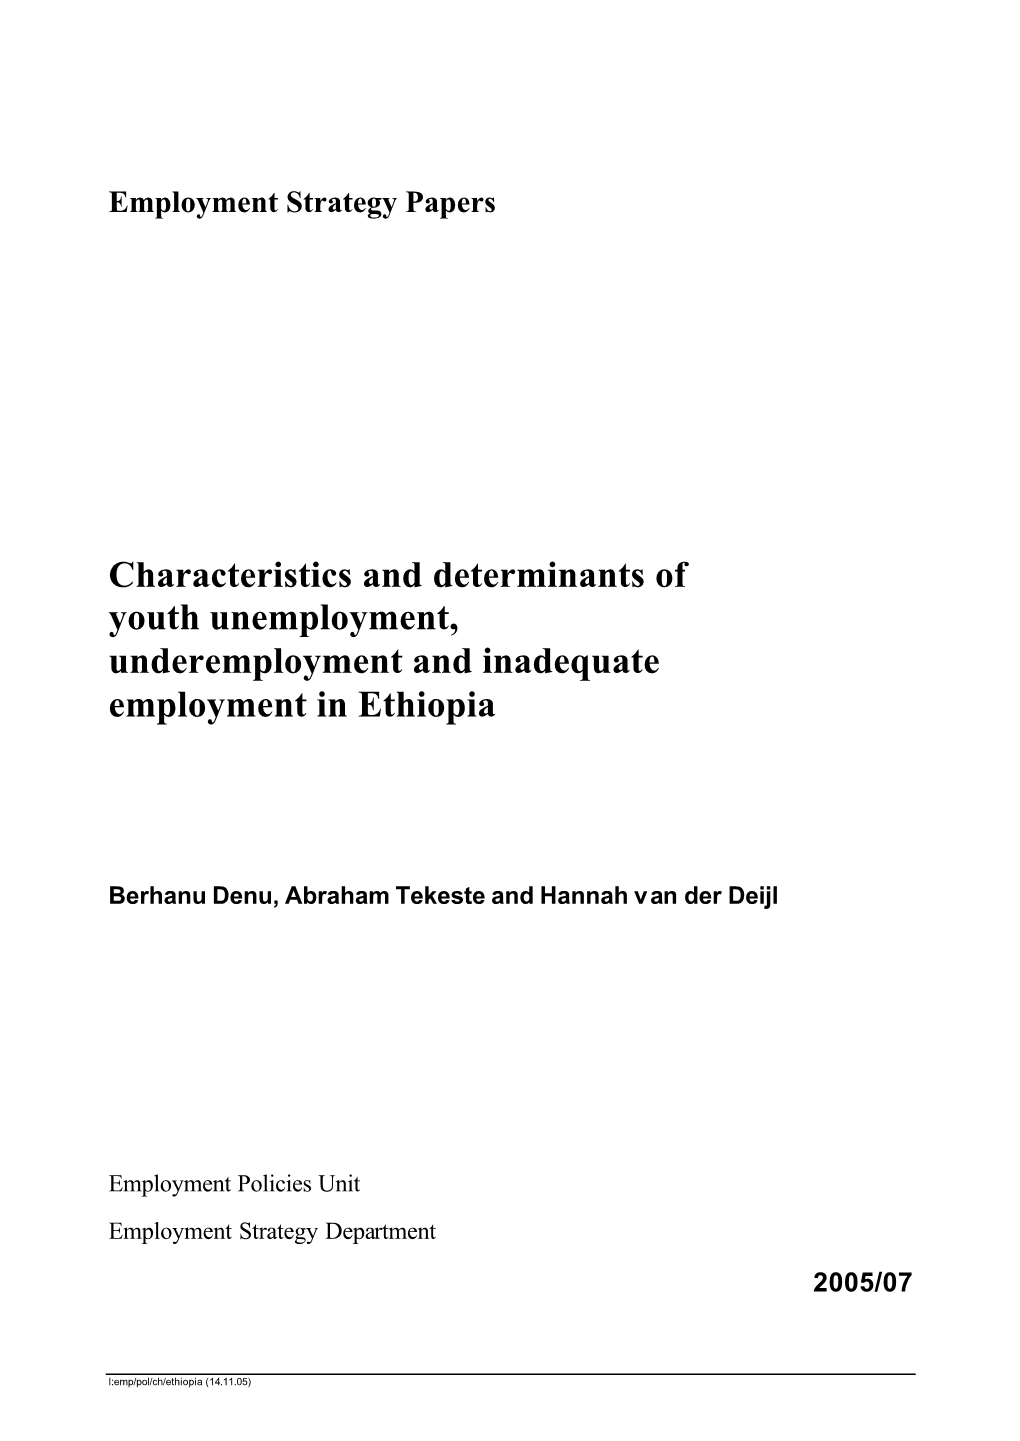 Characteristics and Determinants of Youth Unemployment, Underemployment and Inadequate Employment in Ethiopia